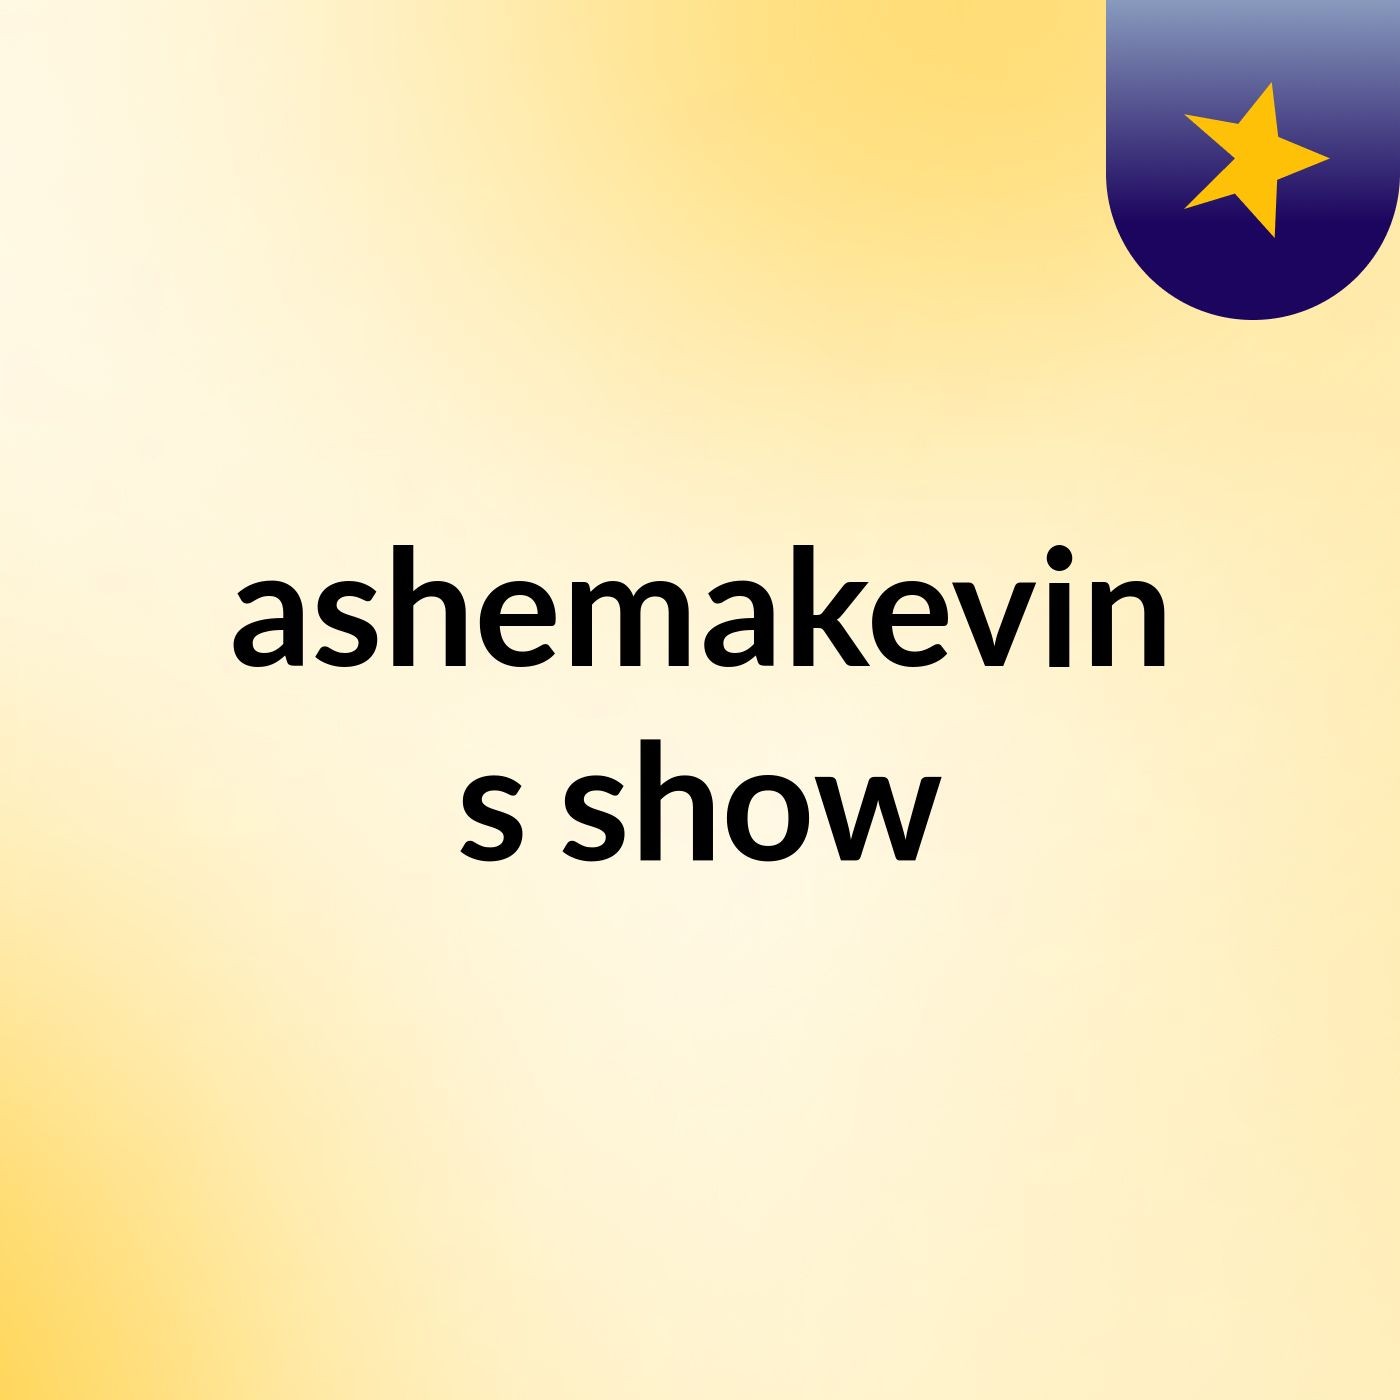 Episode 2 - ashemakevin's show